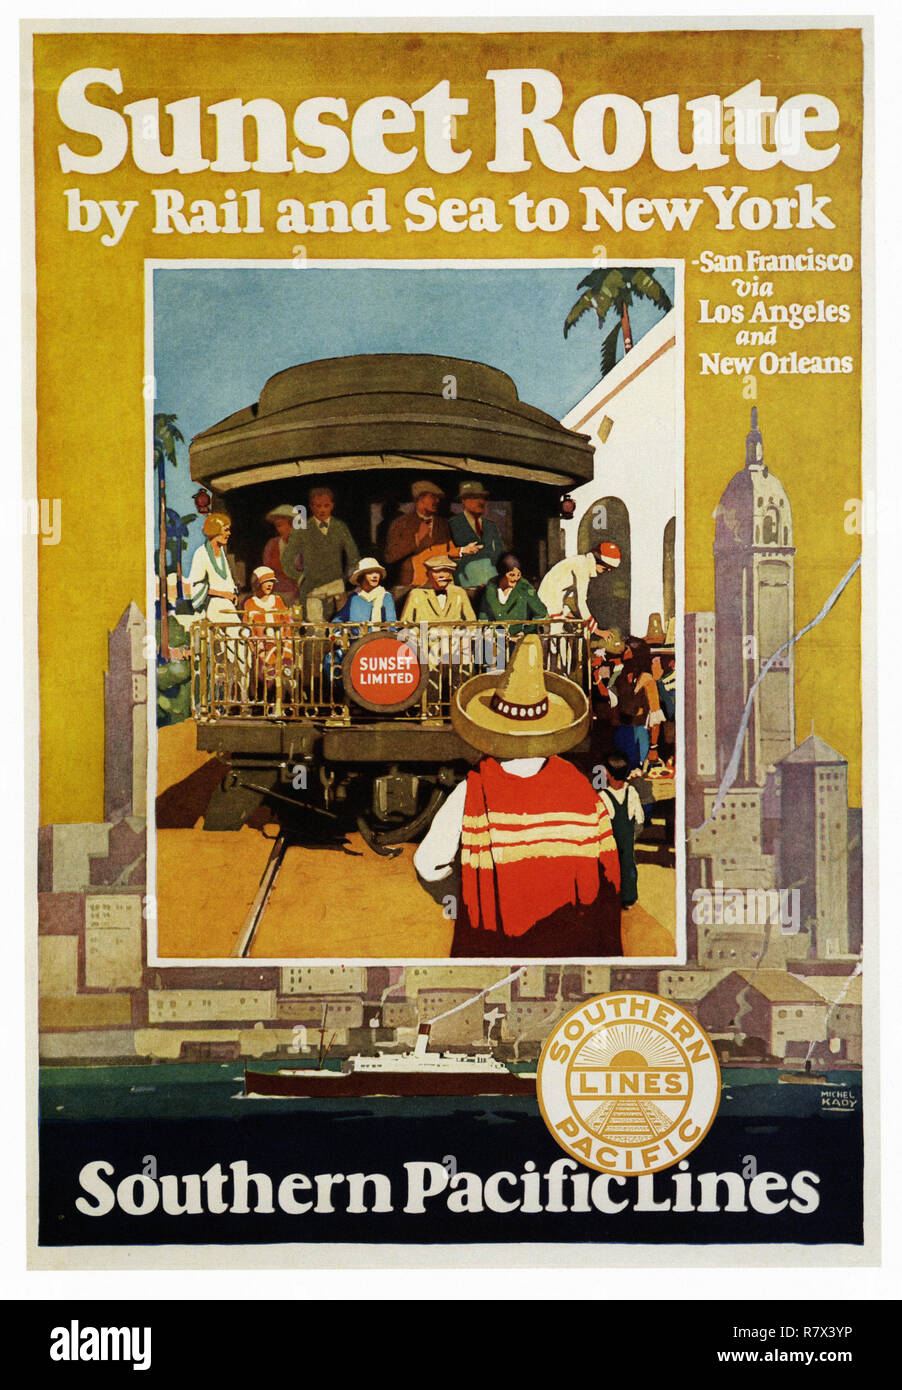 Southern Pacific Line - Vintage Travel Poster Stockfoto